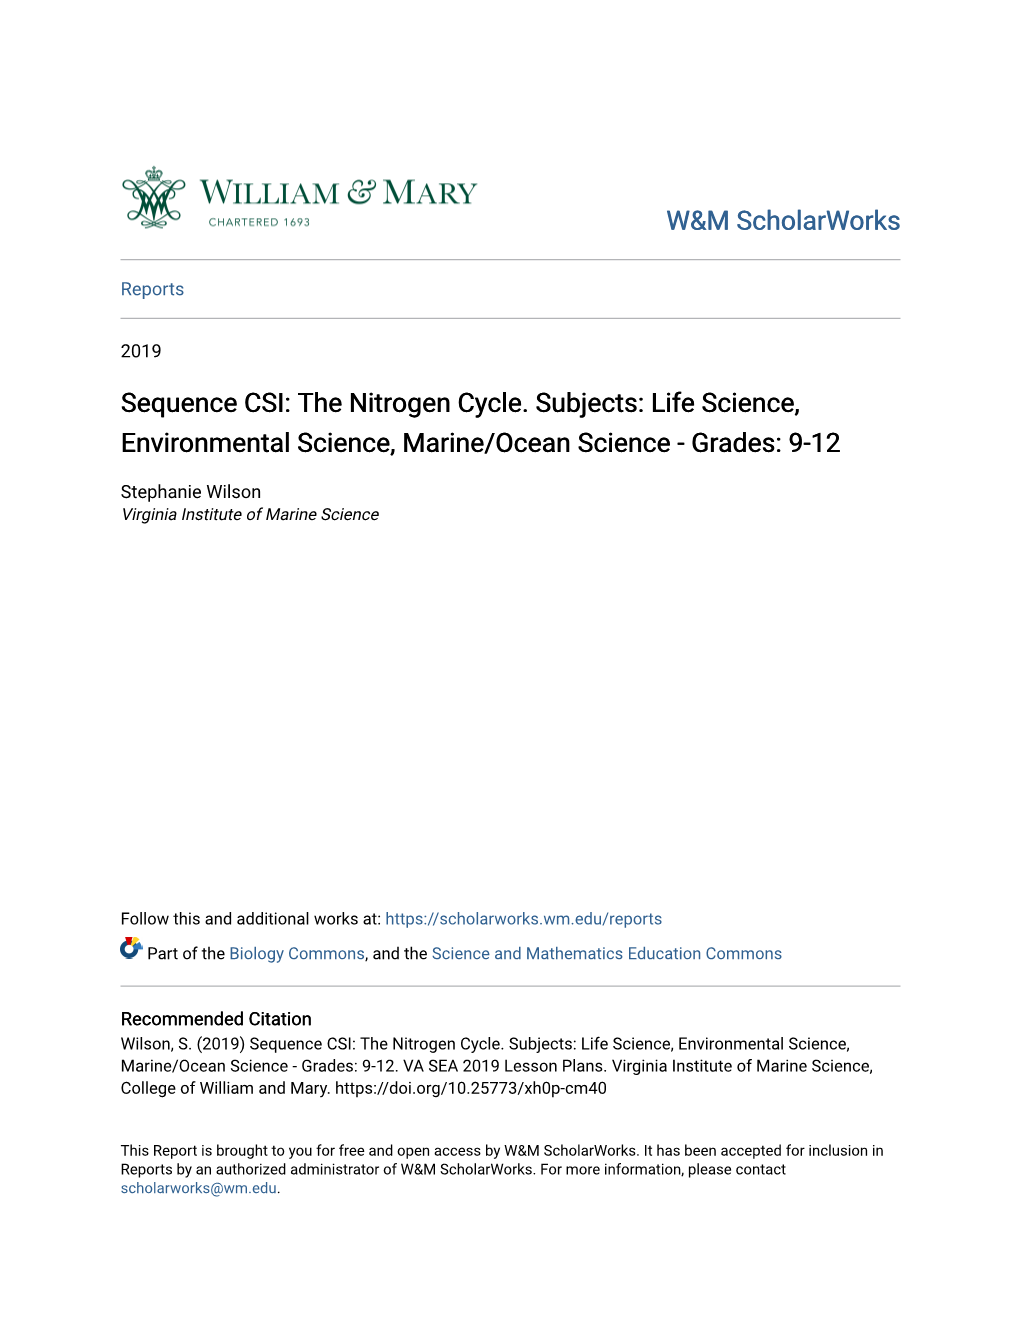 Sequence CSI: the Nitrogen Cycle. Subjects: Life Science, Environmental Science, Marine/Ocean Science - Grades: 9-12